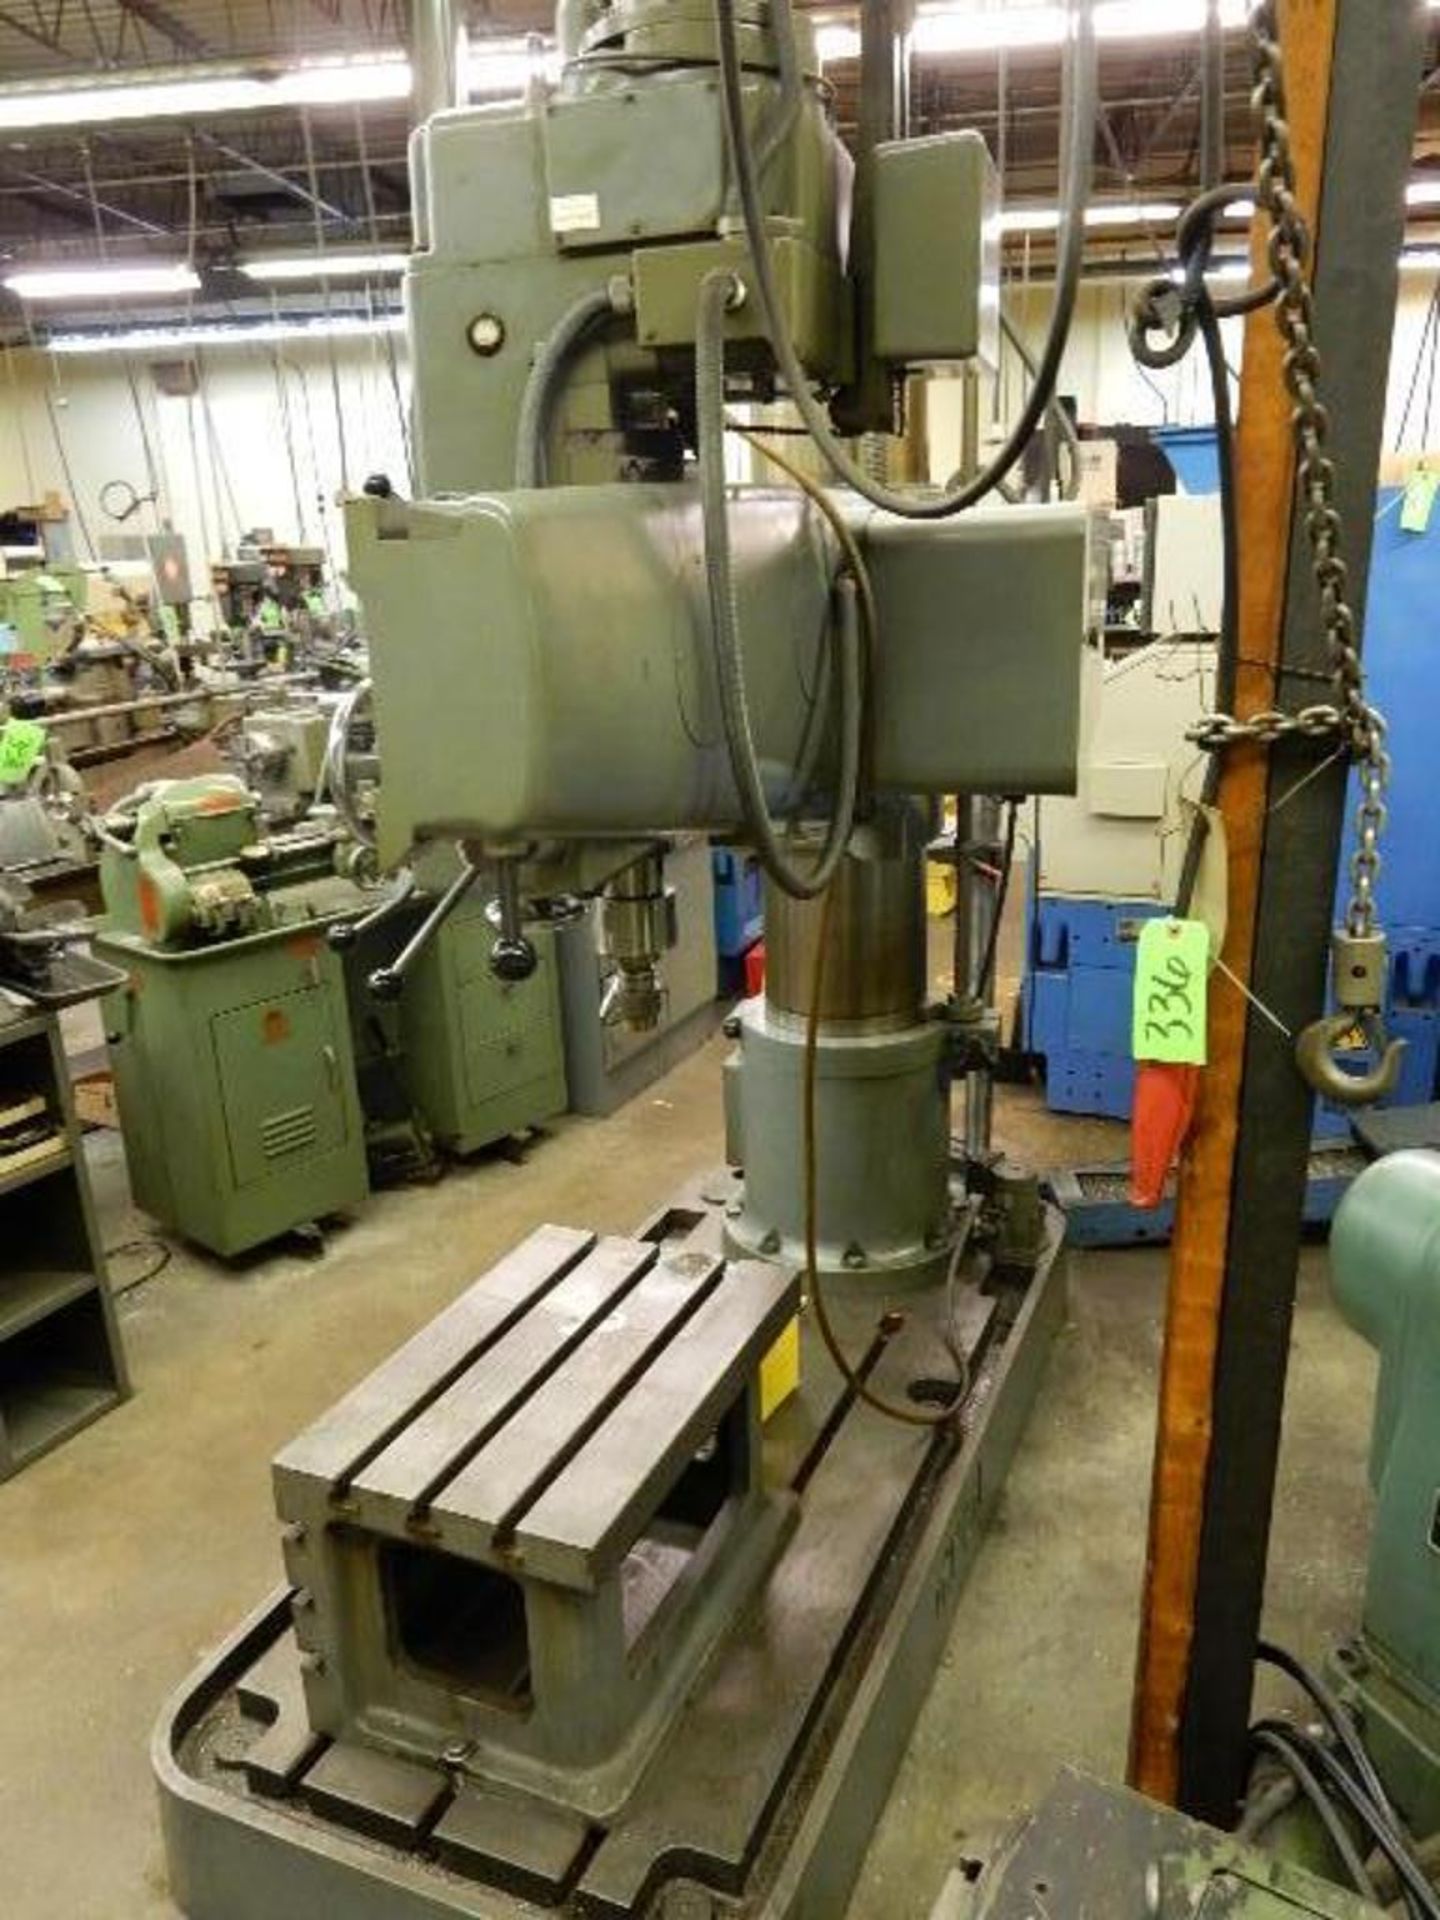 Ikeda Model RM-1375 Radial Arm Drill, 13" Column, 5' Arm, 30-1500 RPM Spindle Speeds, 26.5" - Image 17 of 27